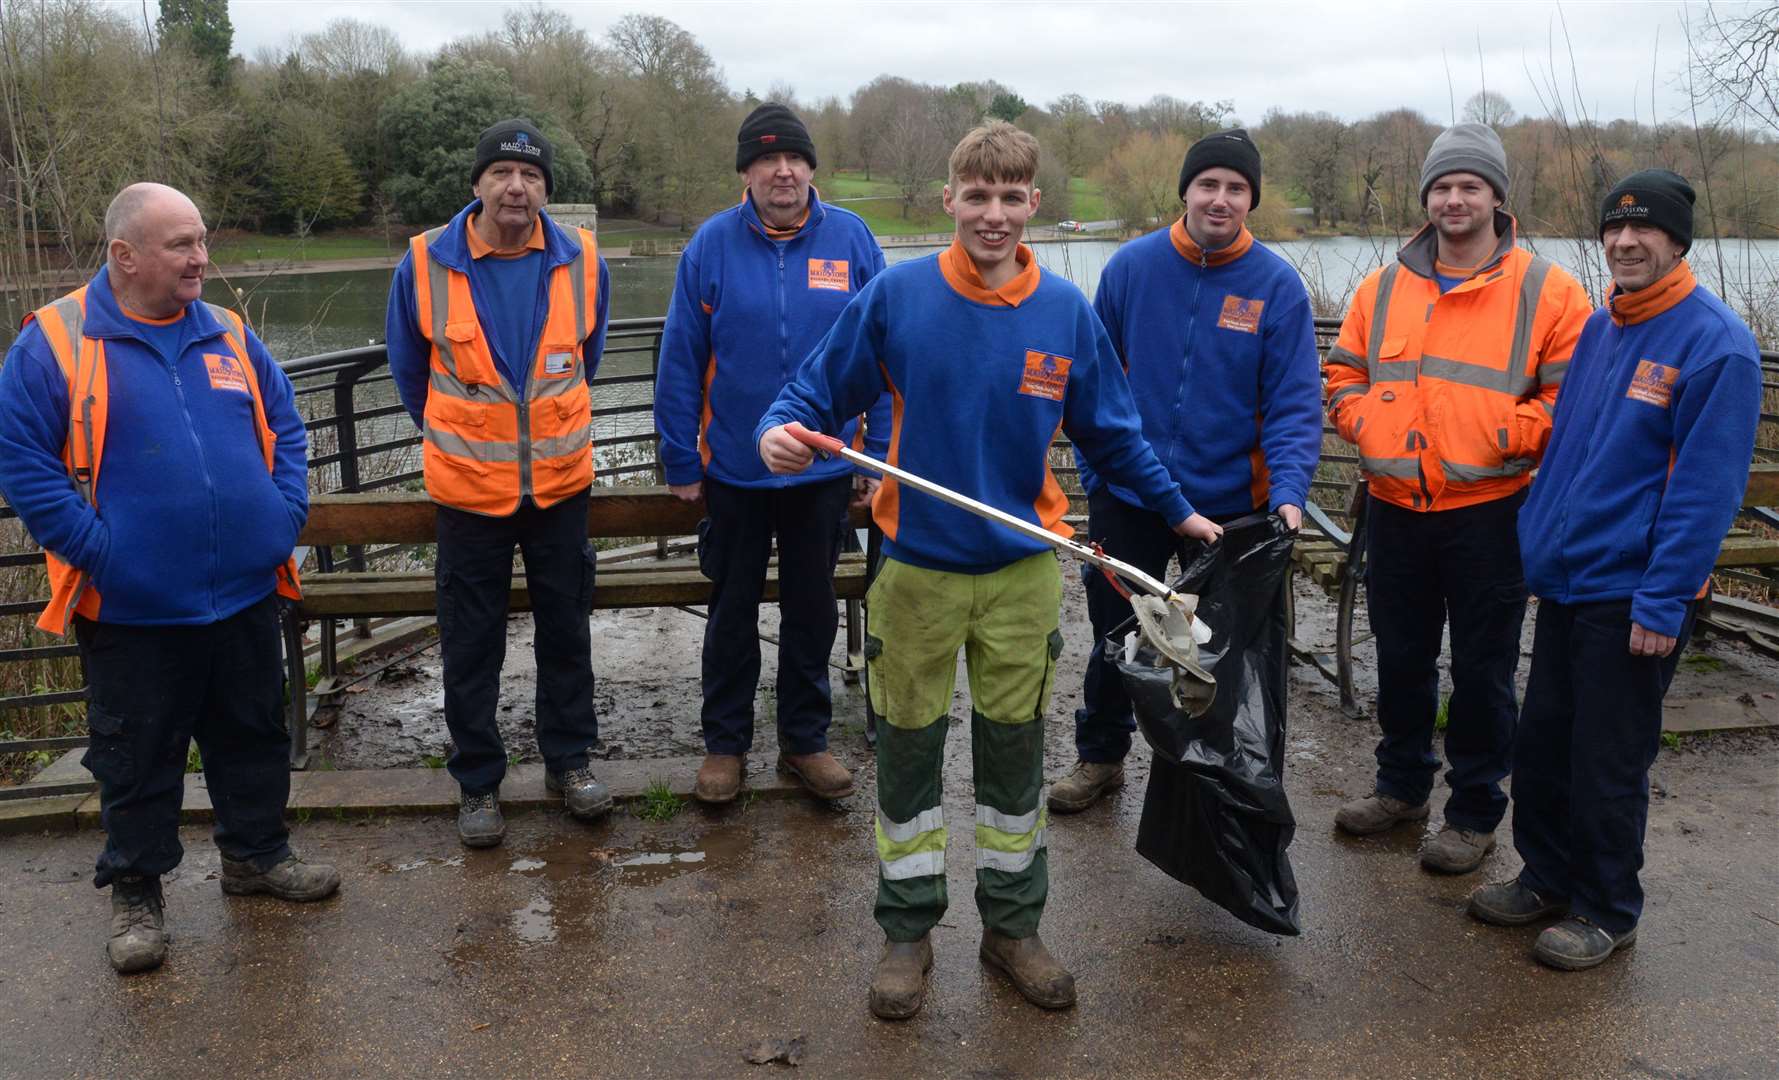 Students at Grow 19, a further education college set up by Five Acre Wood School. The students are pictured here on work experience with Maidstone council staff Picture: Chris Davey